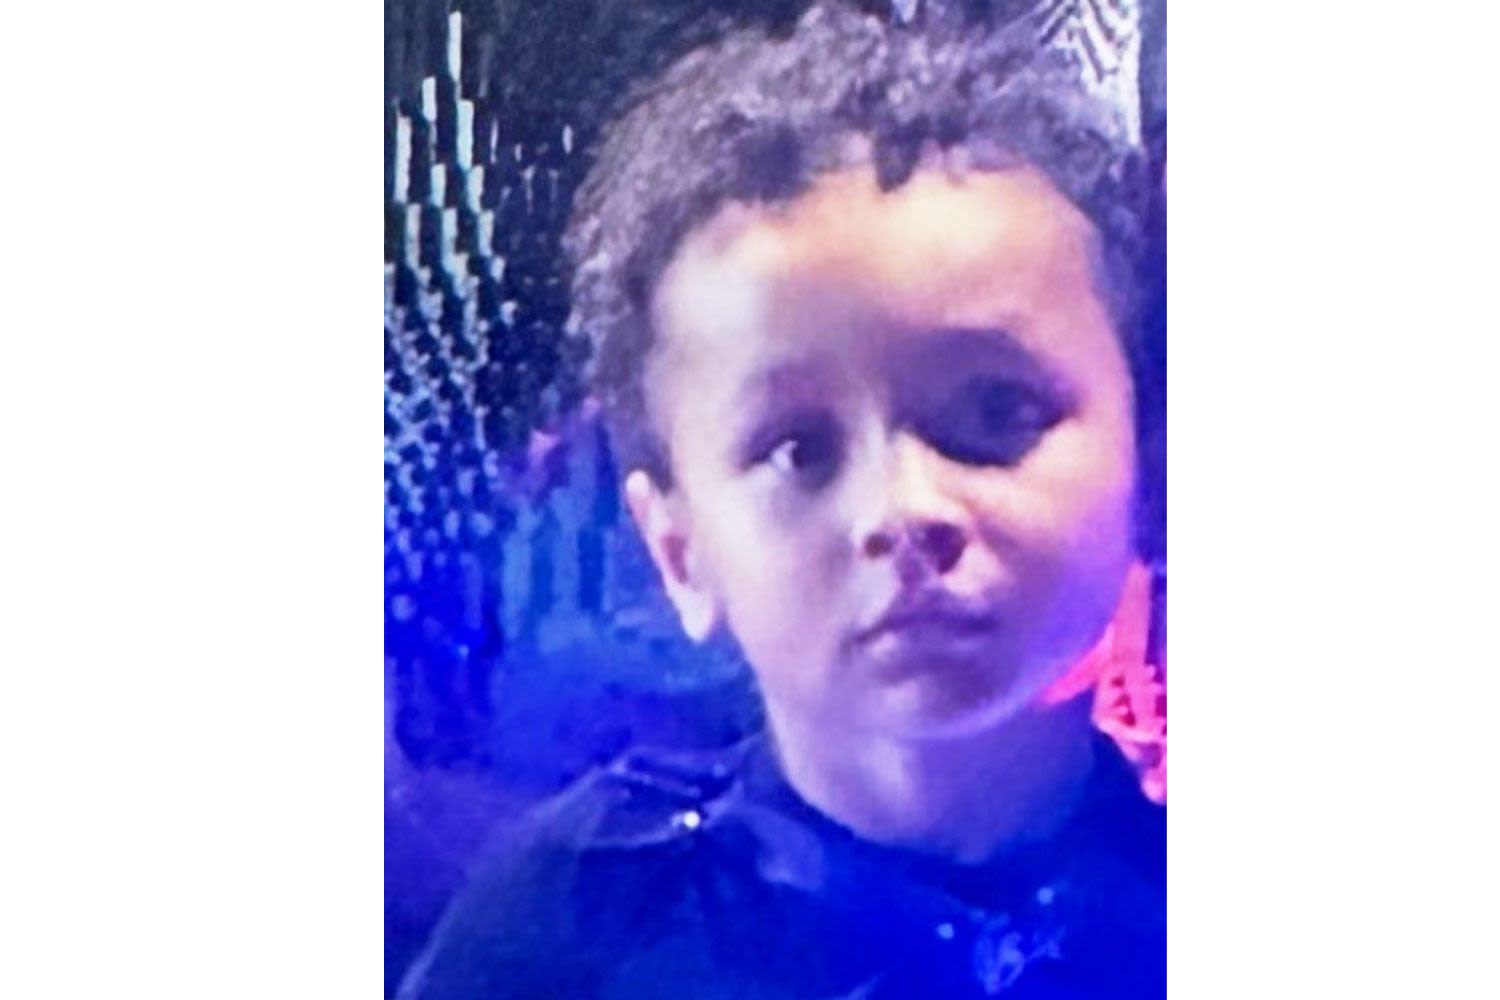 3-Year-Old Boy with Autism Found Dead in Water Near Disney World After Wandering Off